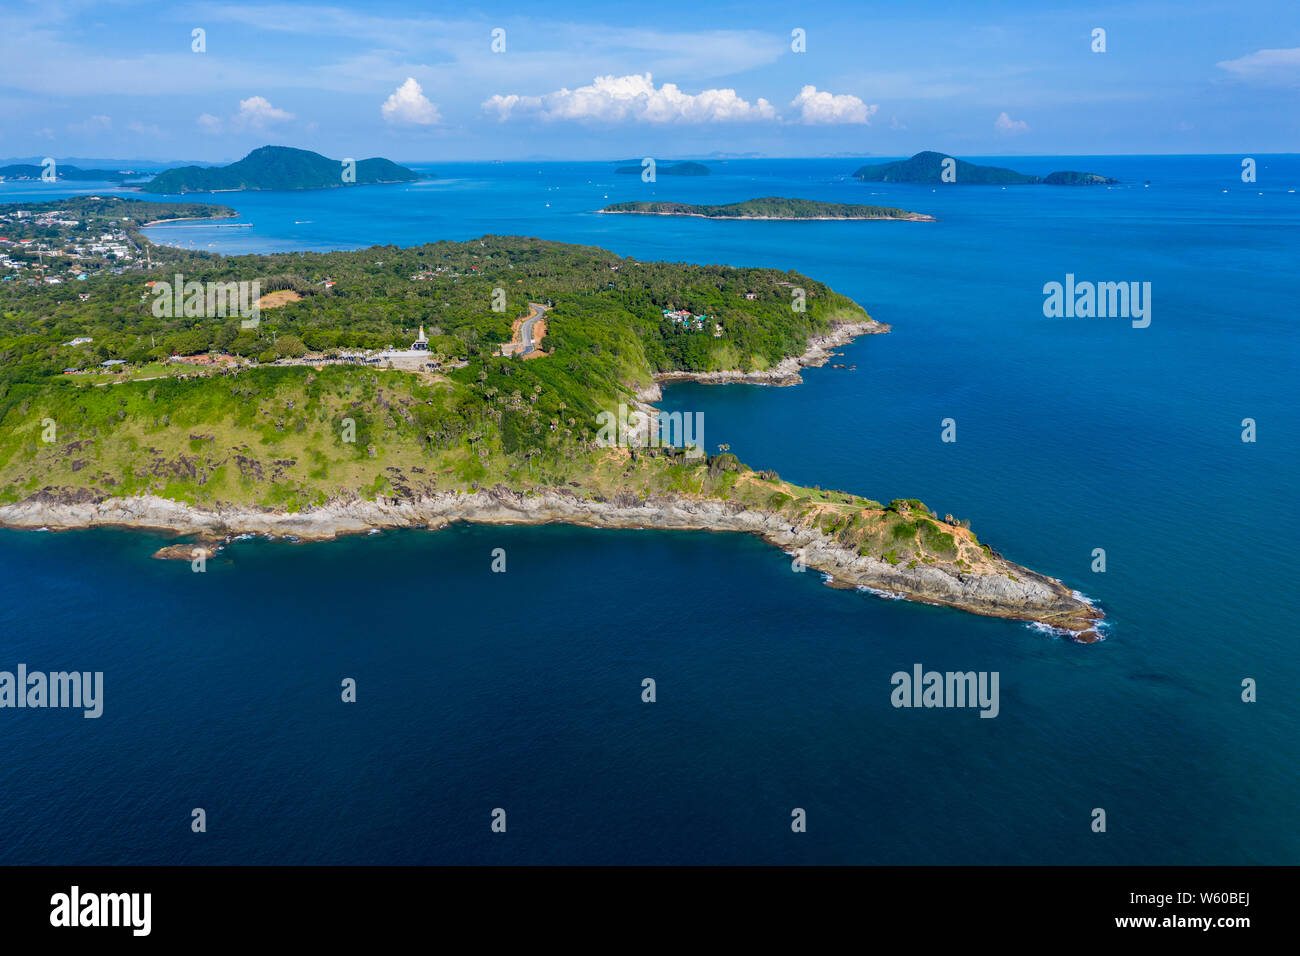 Aerial drone view of a rocky peninsula and a calm, tropical ocean Stock Photo